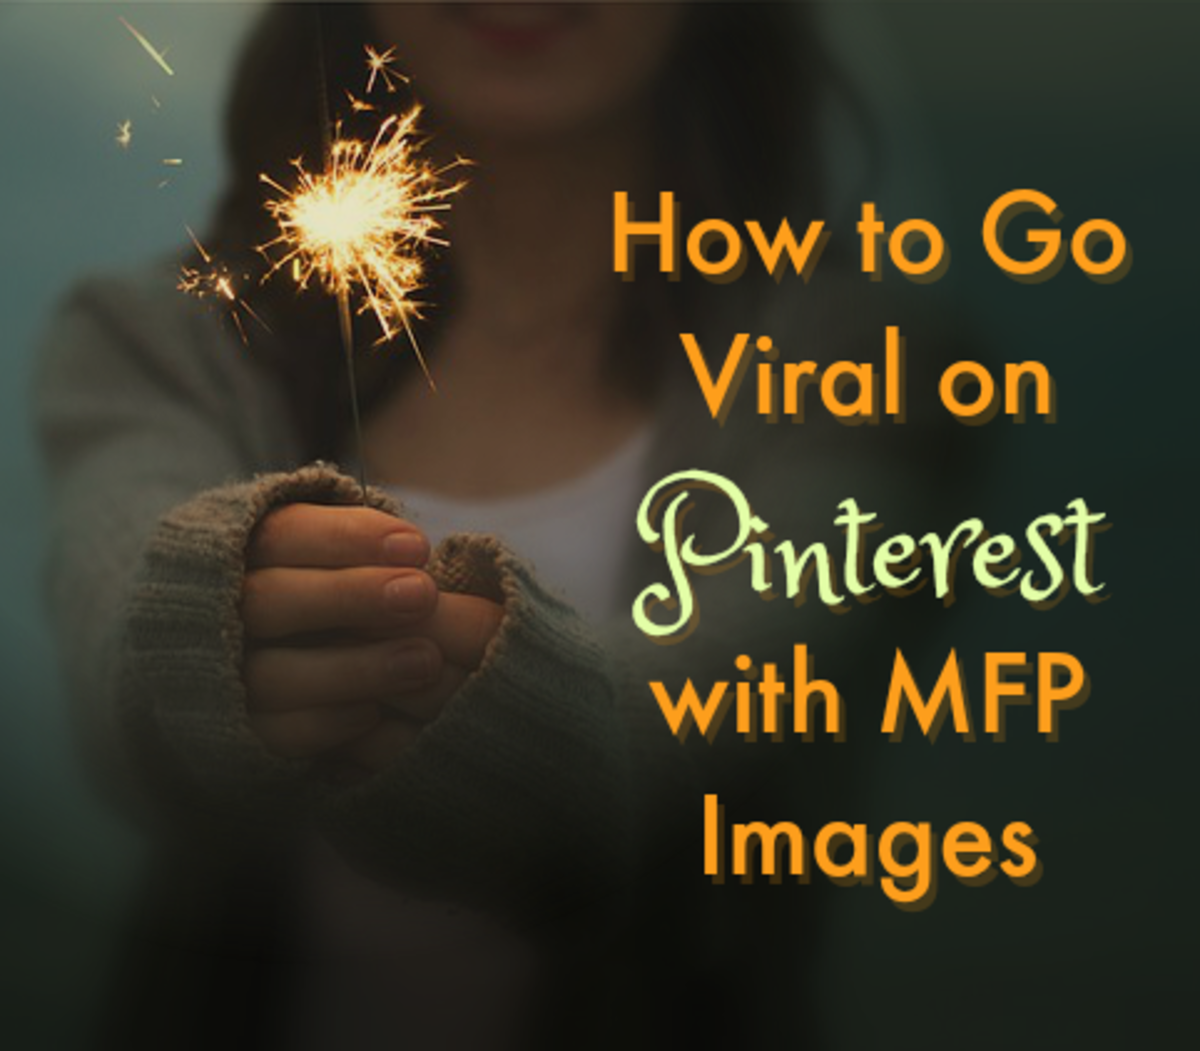 How do you go viral on Pinterest? With MFP images.